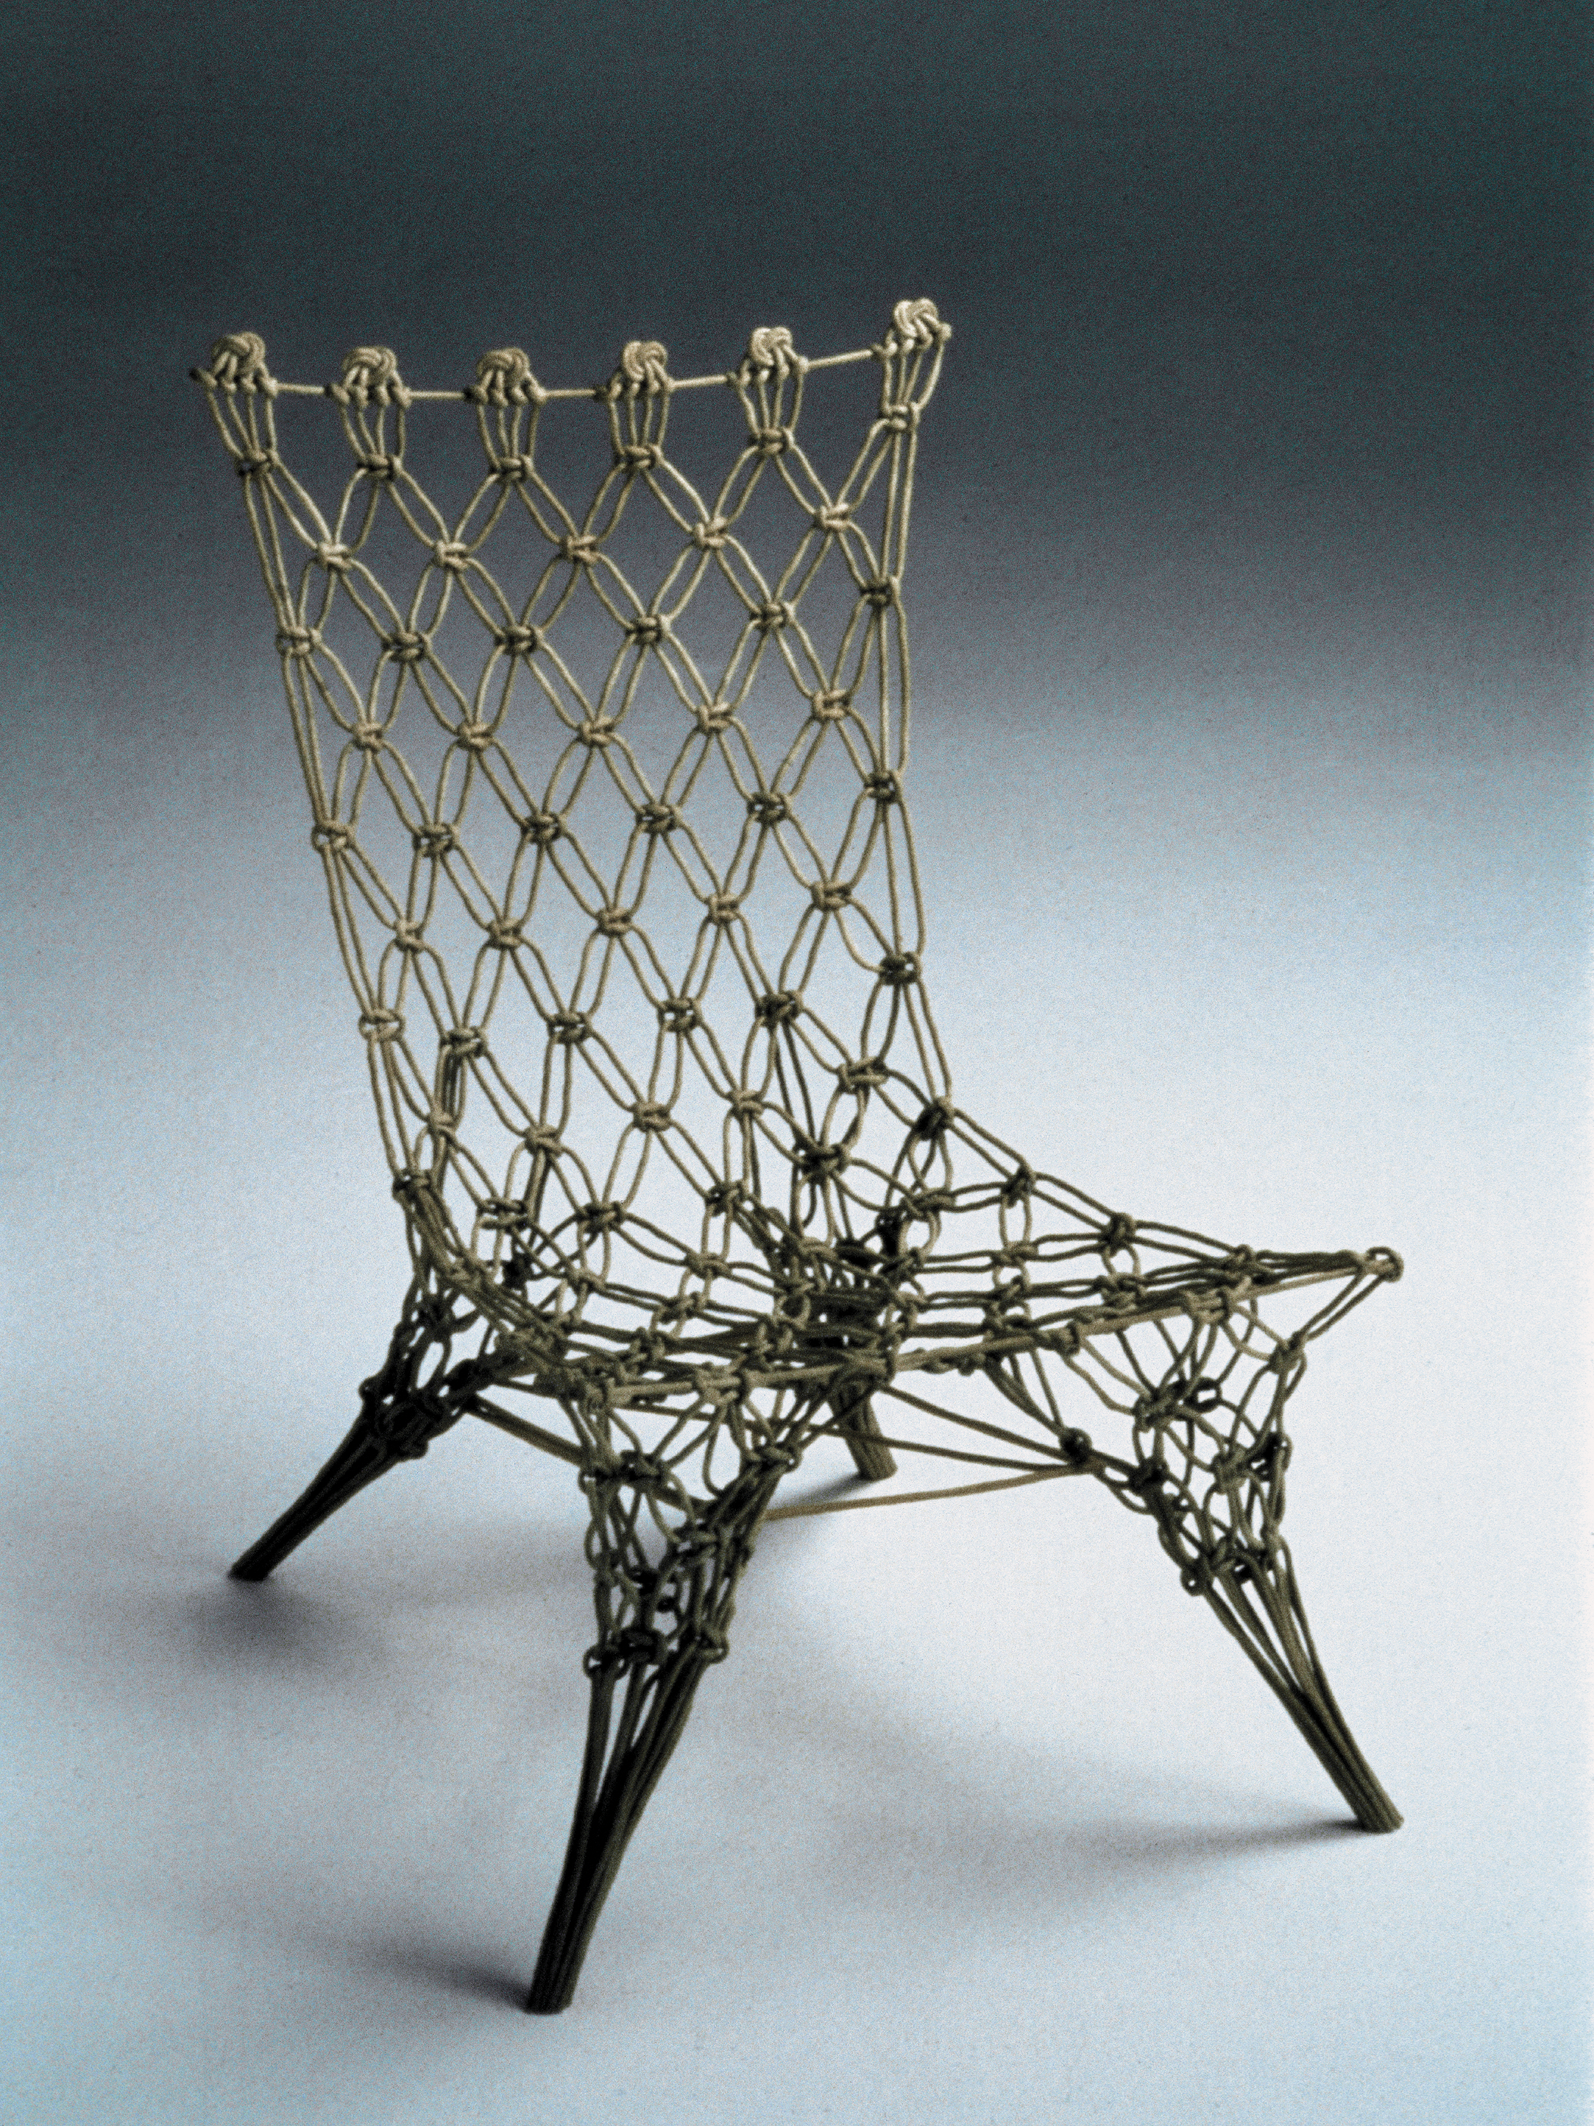 Marcel Wanders Knotted Chair